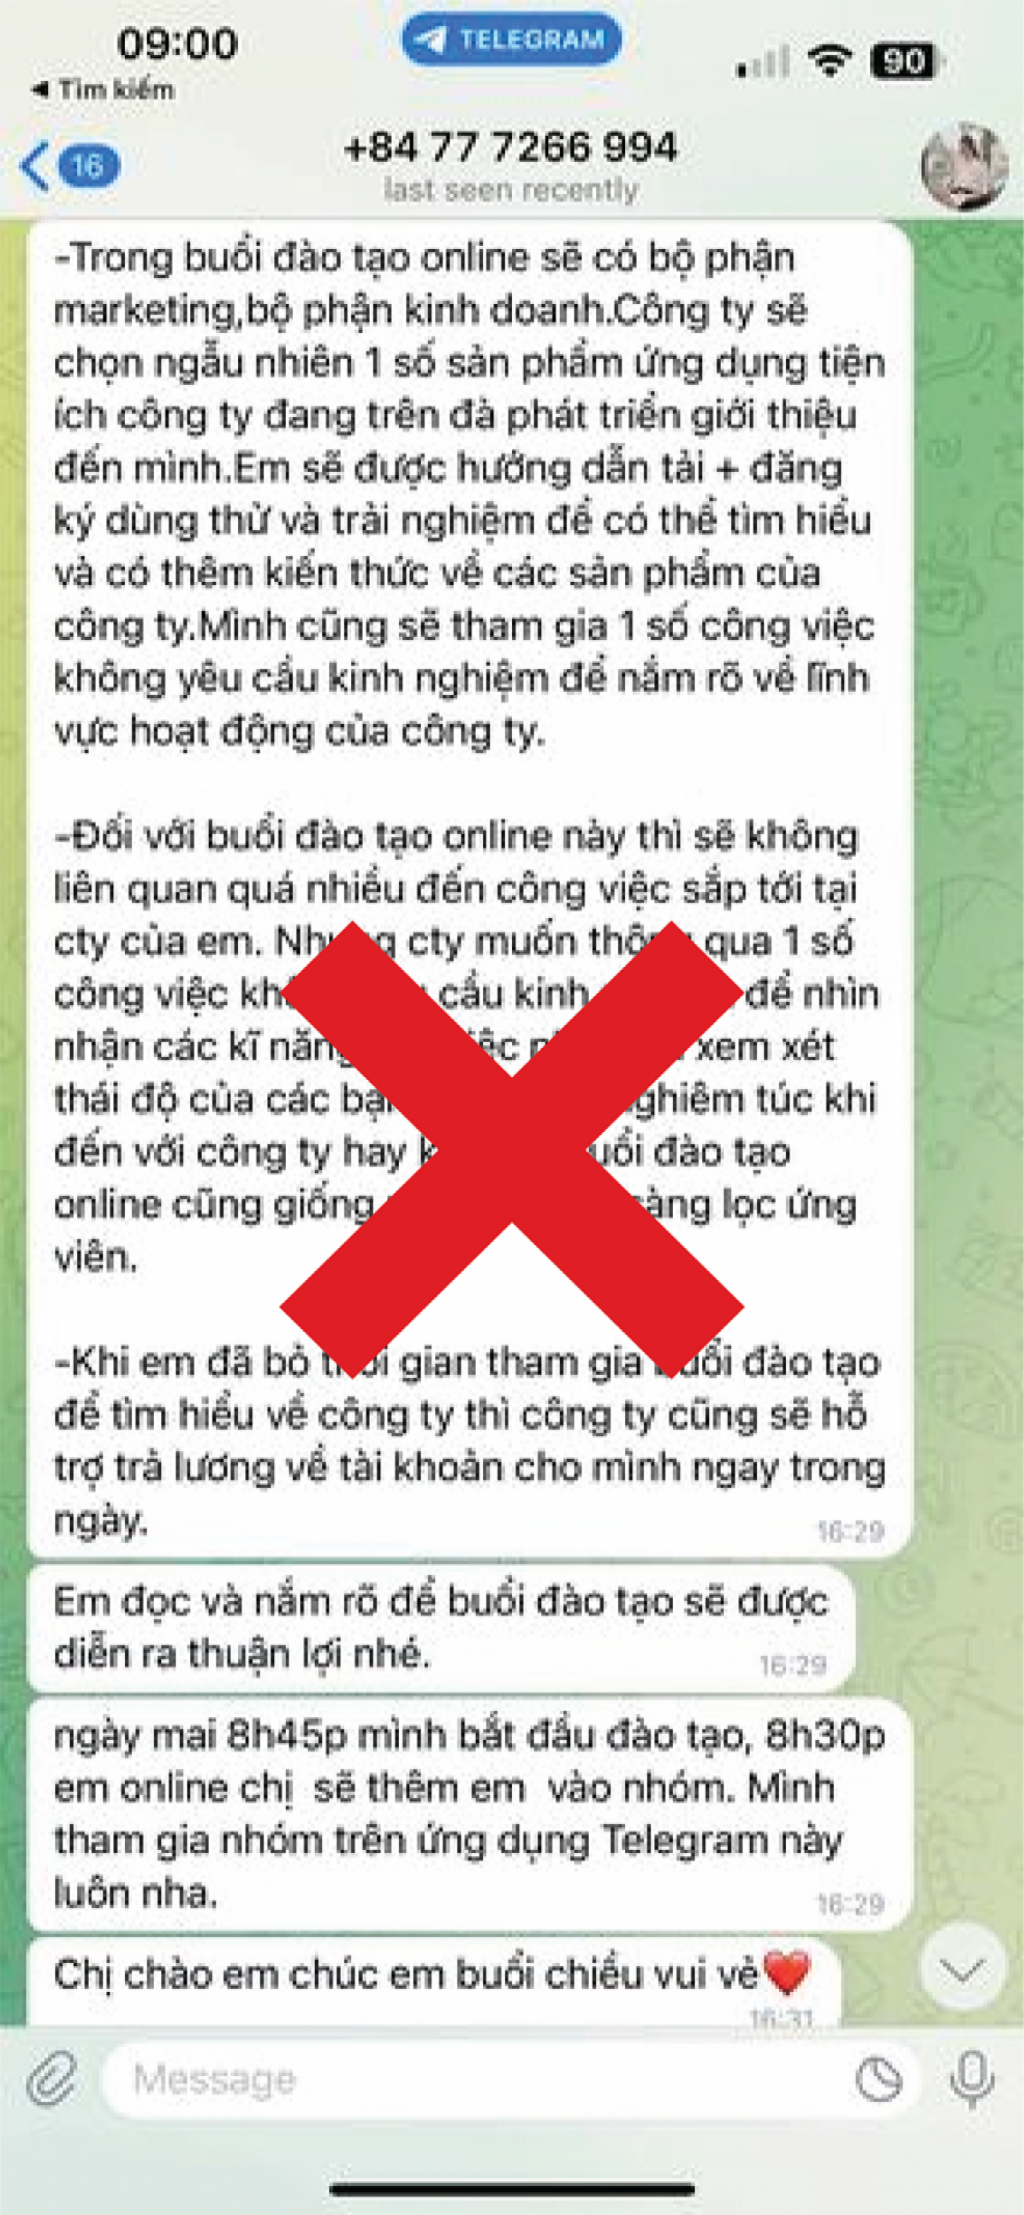 dinh chinh 4.png (1.64 MB)